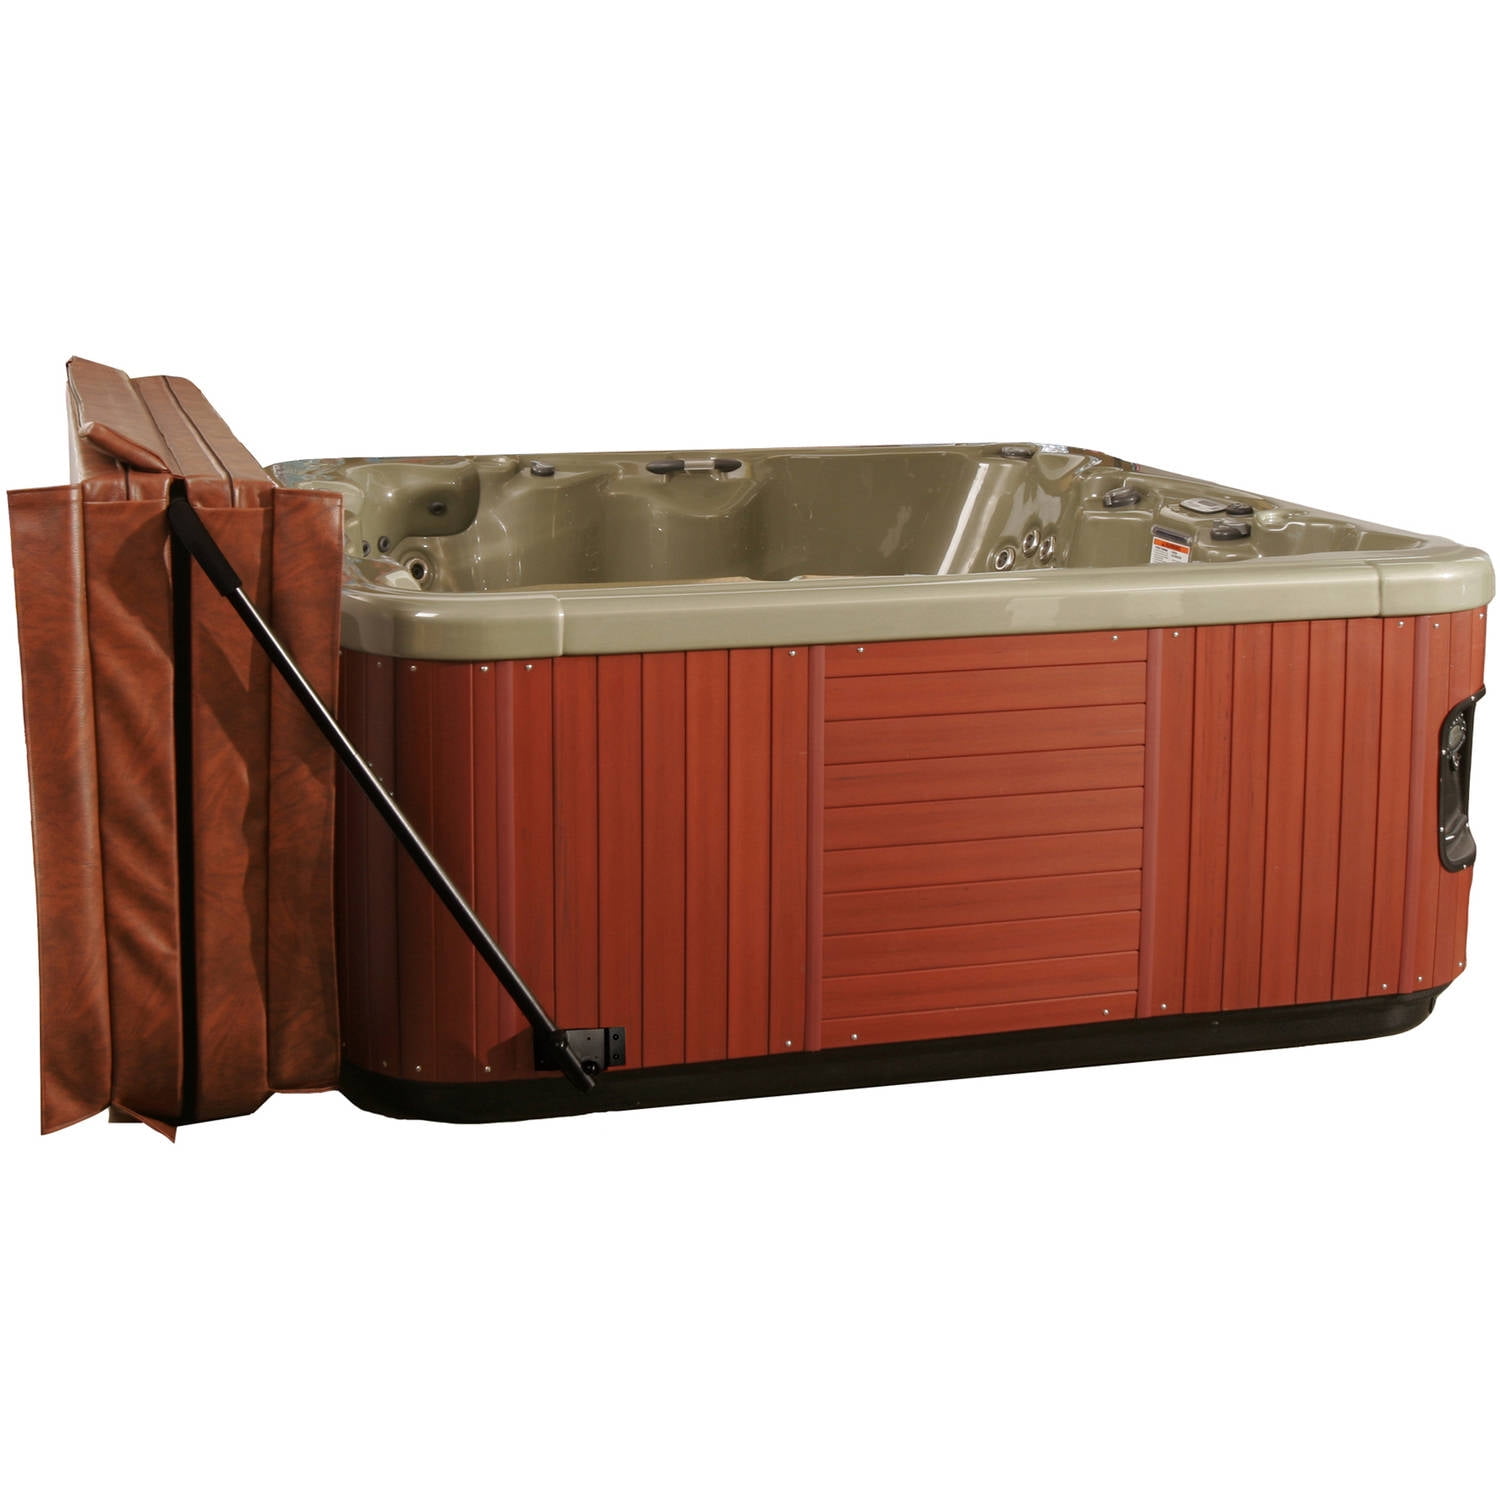 New Spa Cover Lift for Hot Tub w/Under Spa Mount 